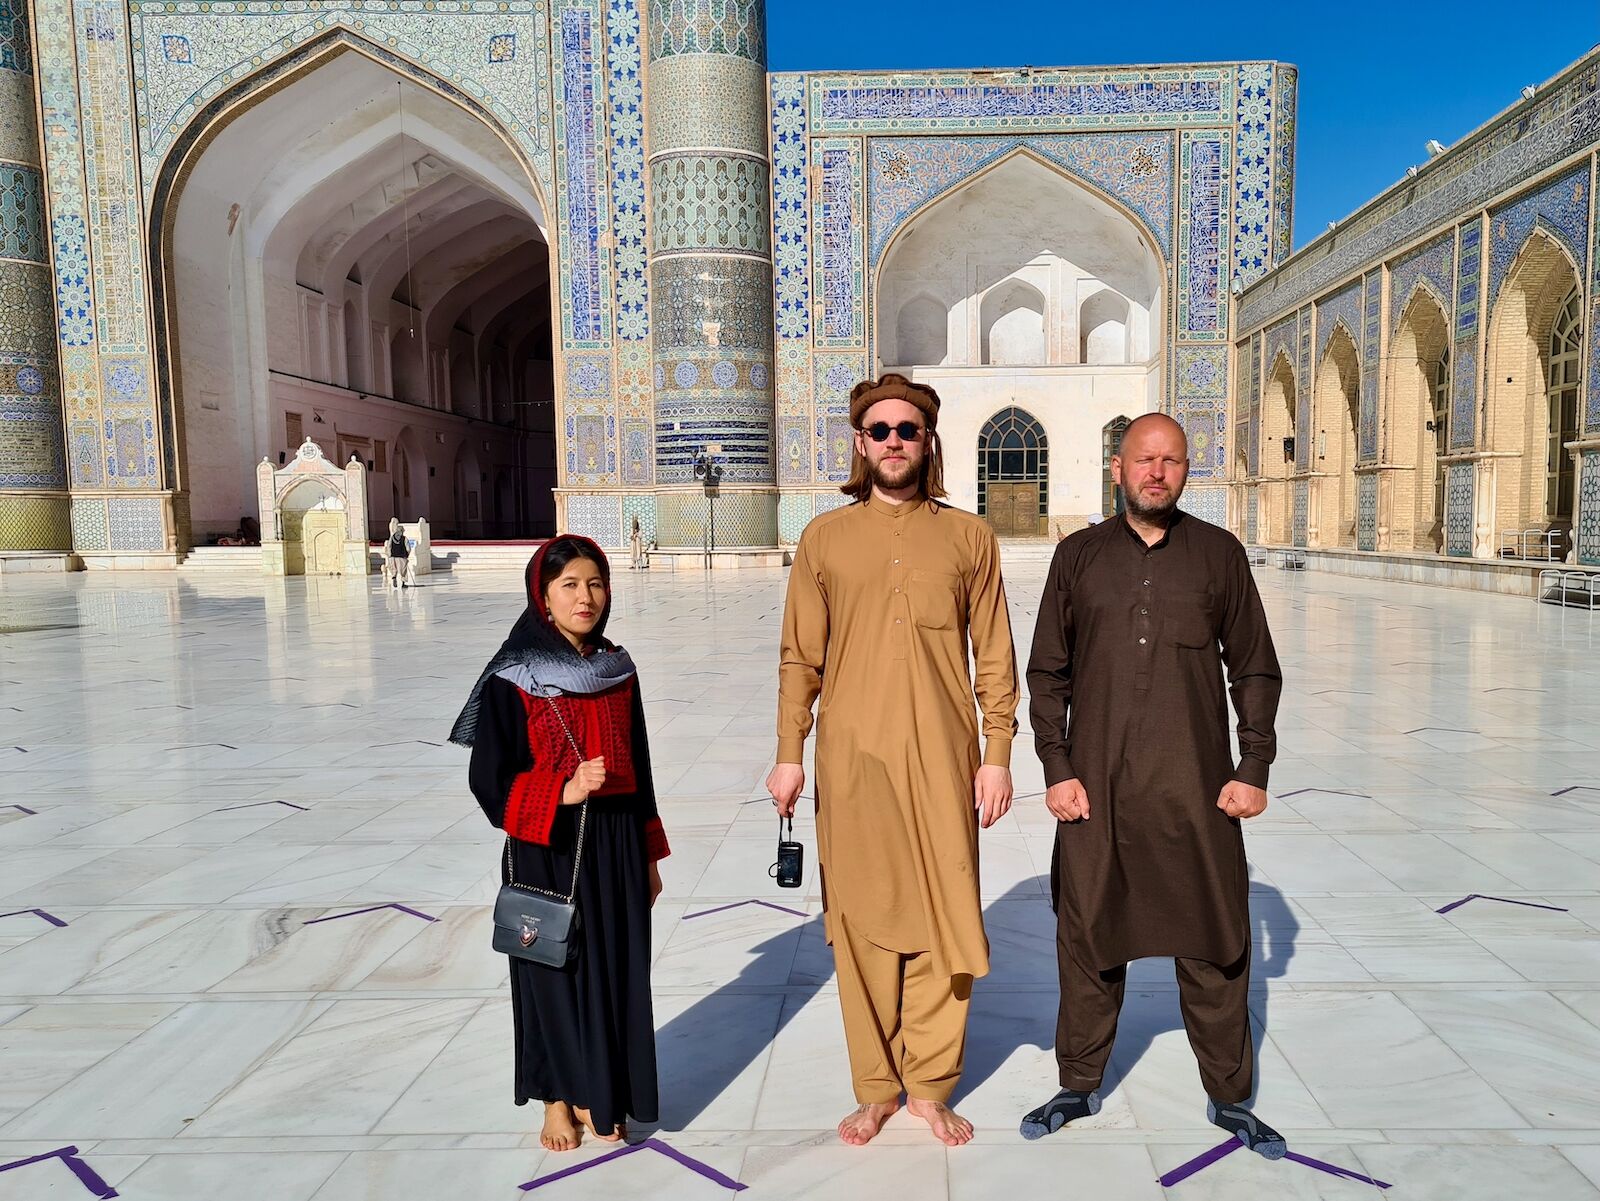 Fatima Haidari, Afghanistan’s first female tour guide poses with a visitors at an historical site